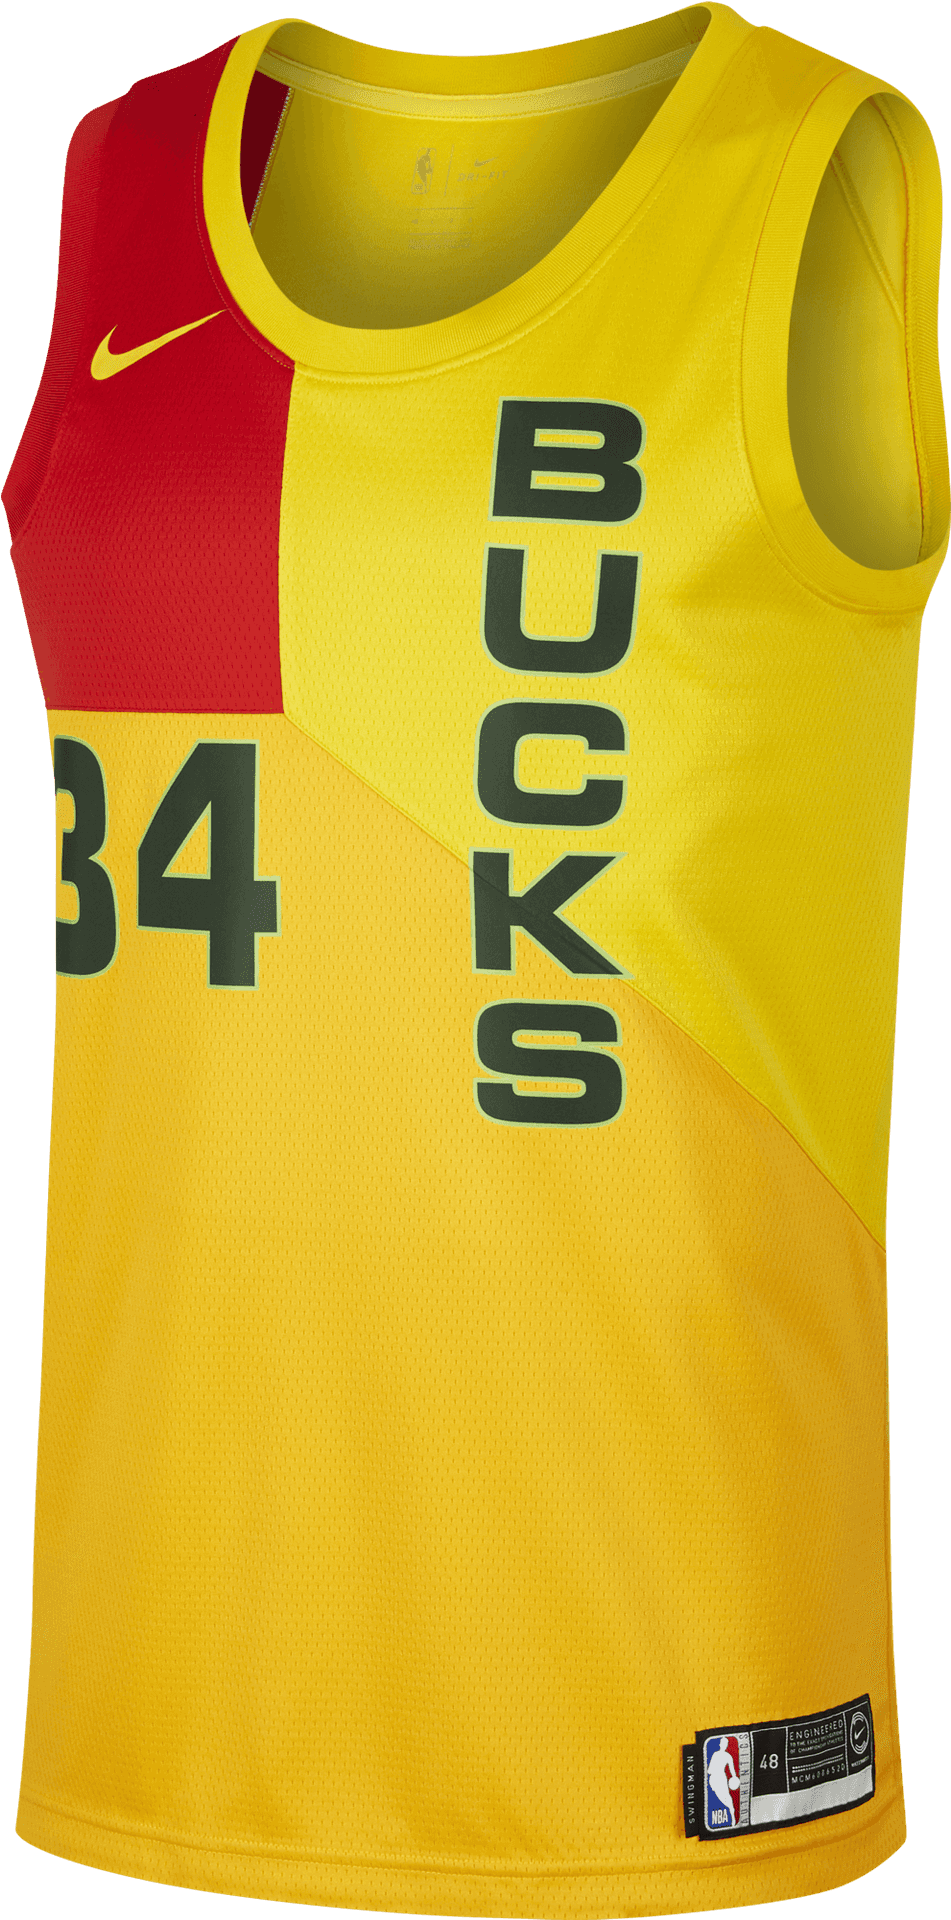 Milwaukee Basketball Jersey Number34 PNG image